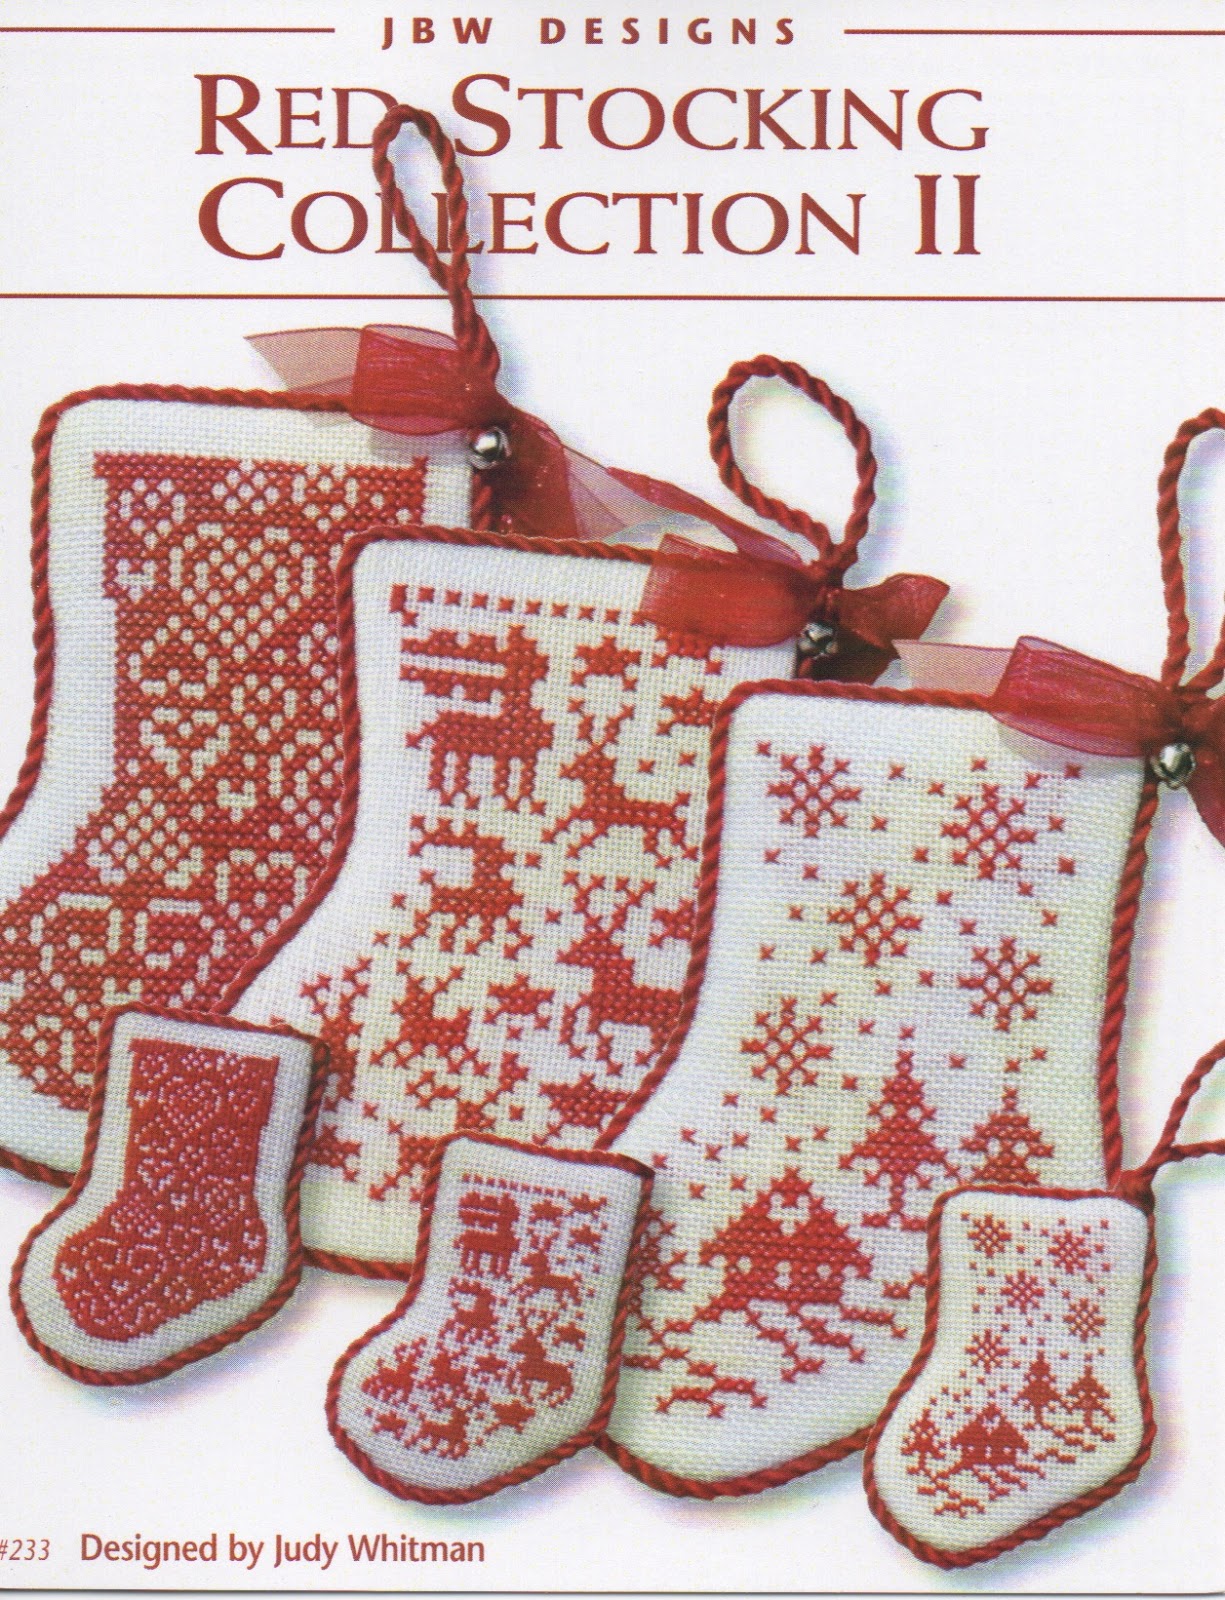 #233 Red Stocking Collection II   by JBW Designs